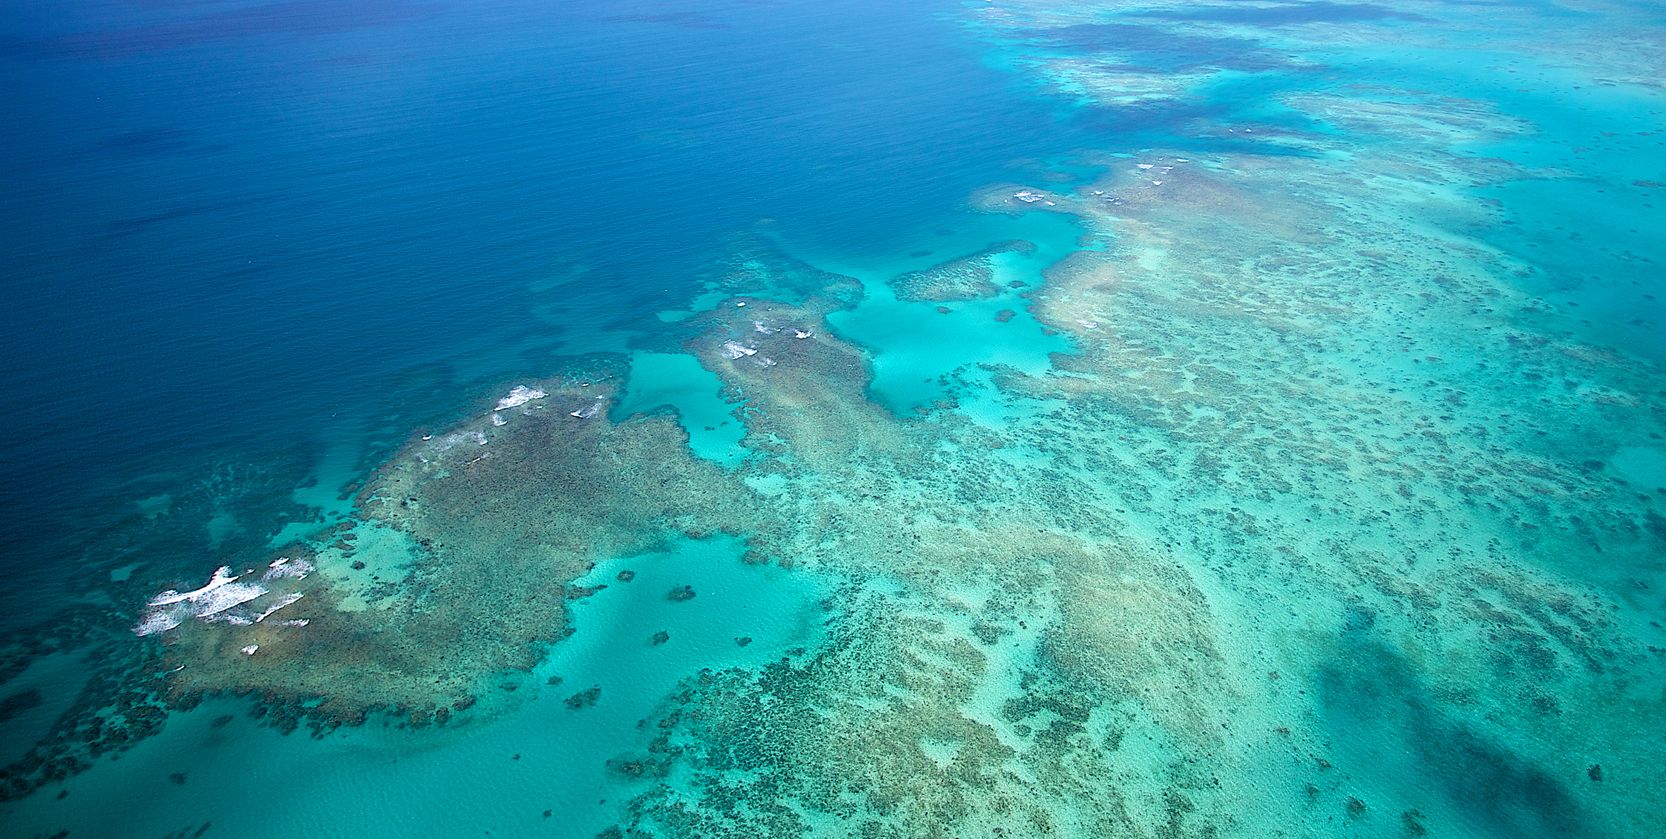 The Great Barrier Reef - Tropical North Queensland